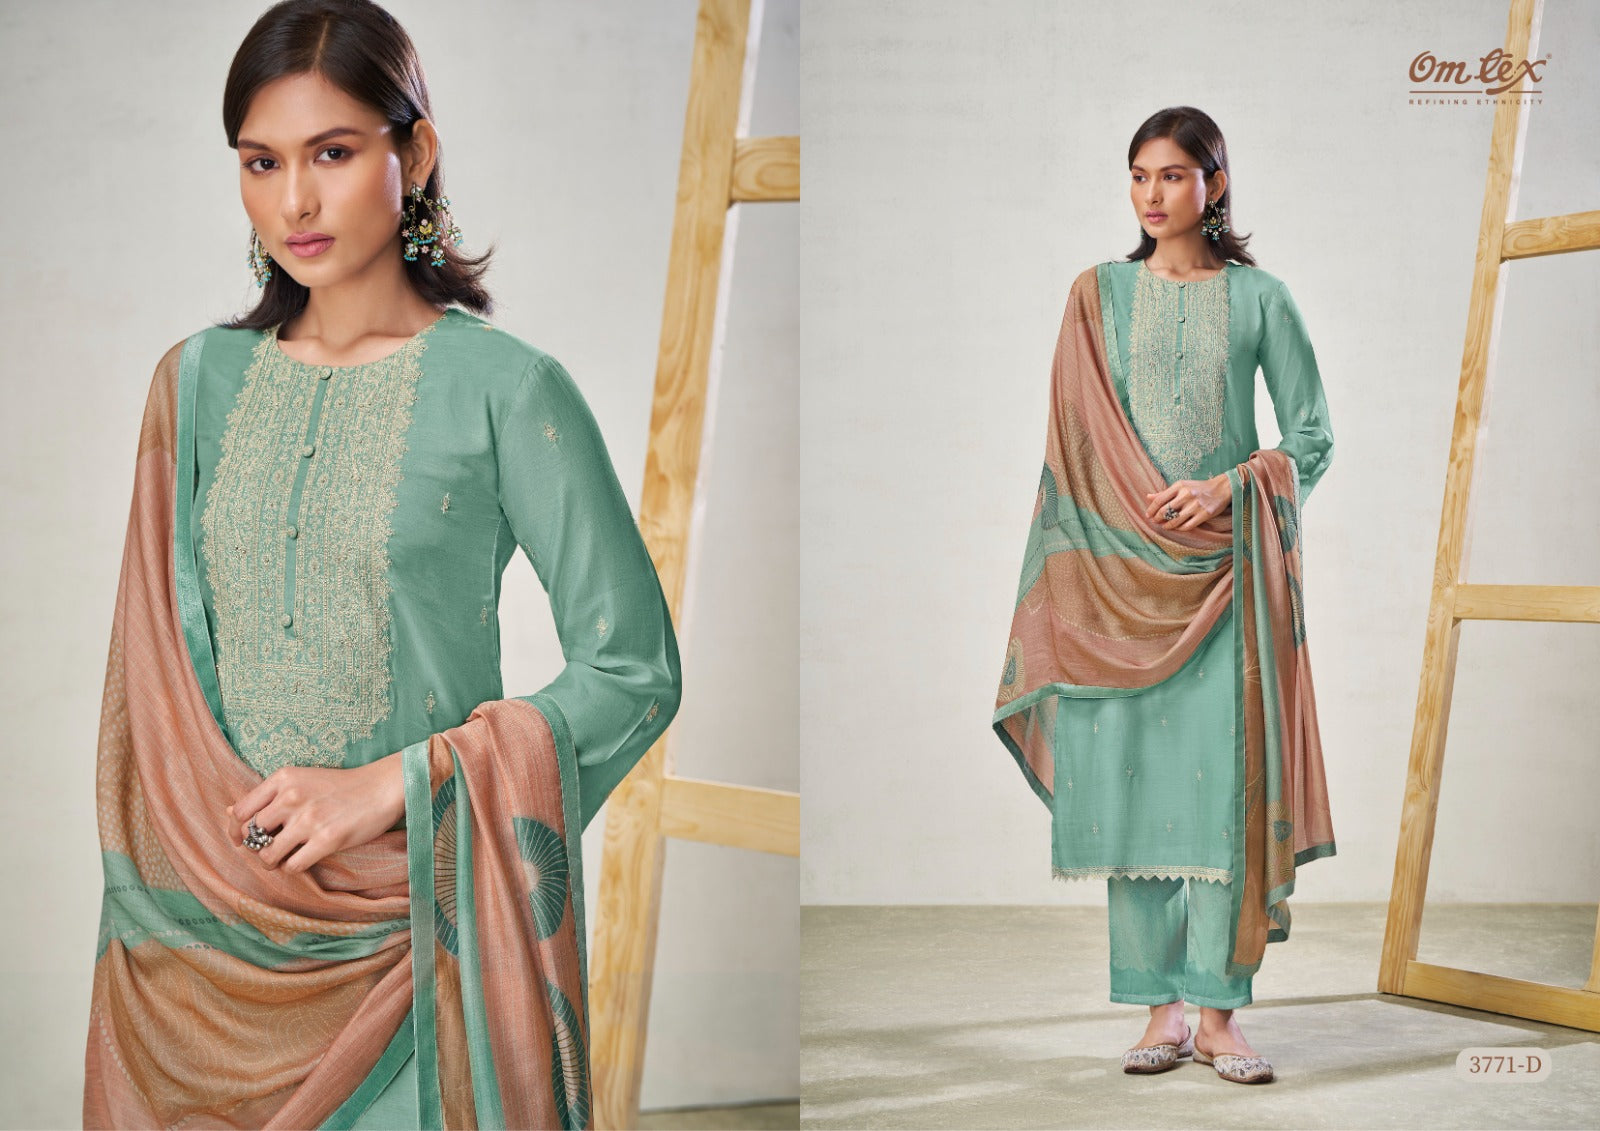 Rose Omtex Silk Pant Style Suits